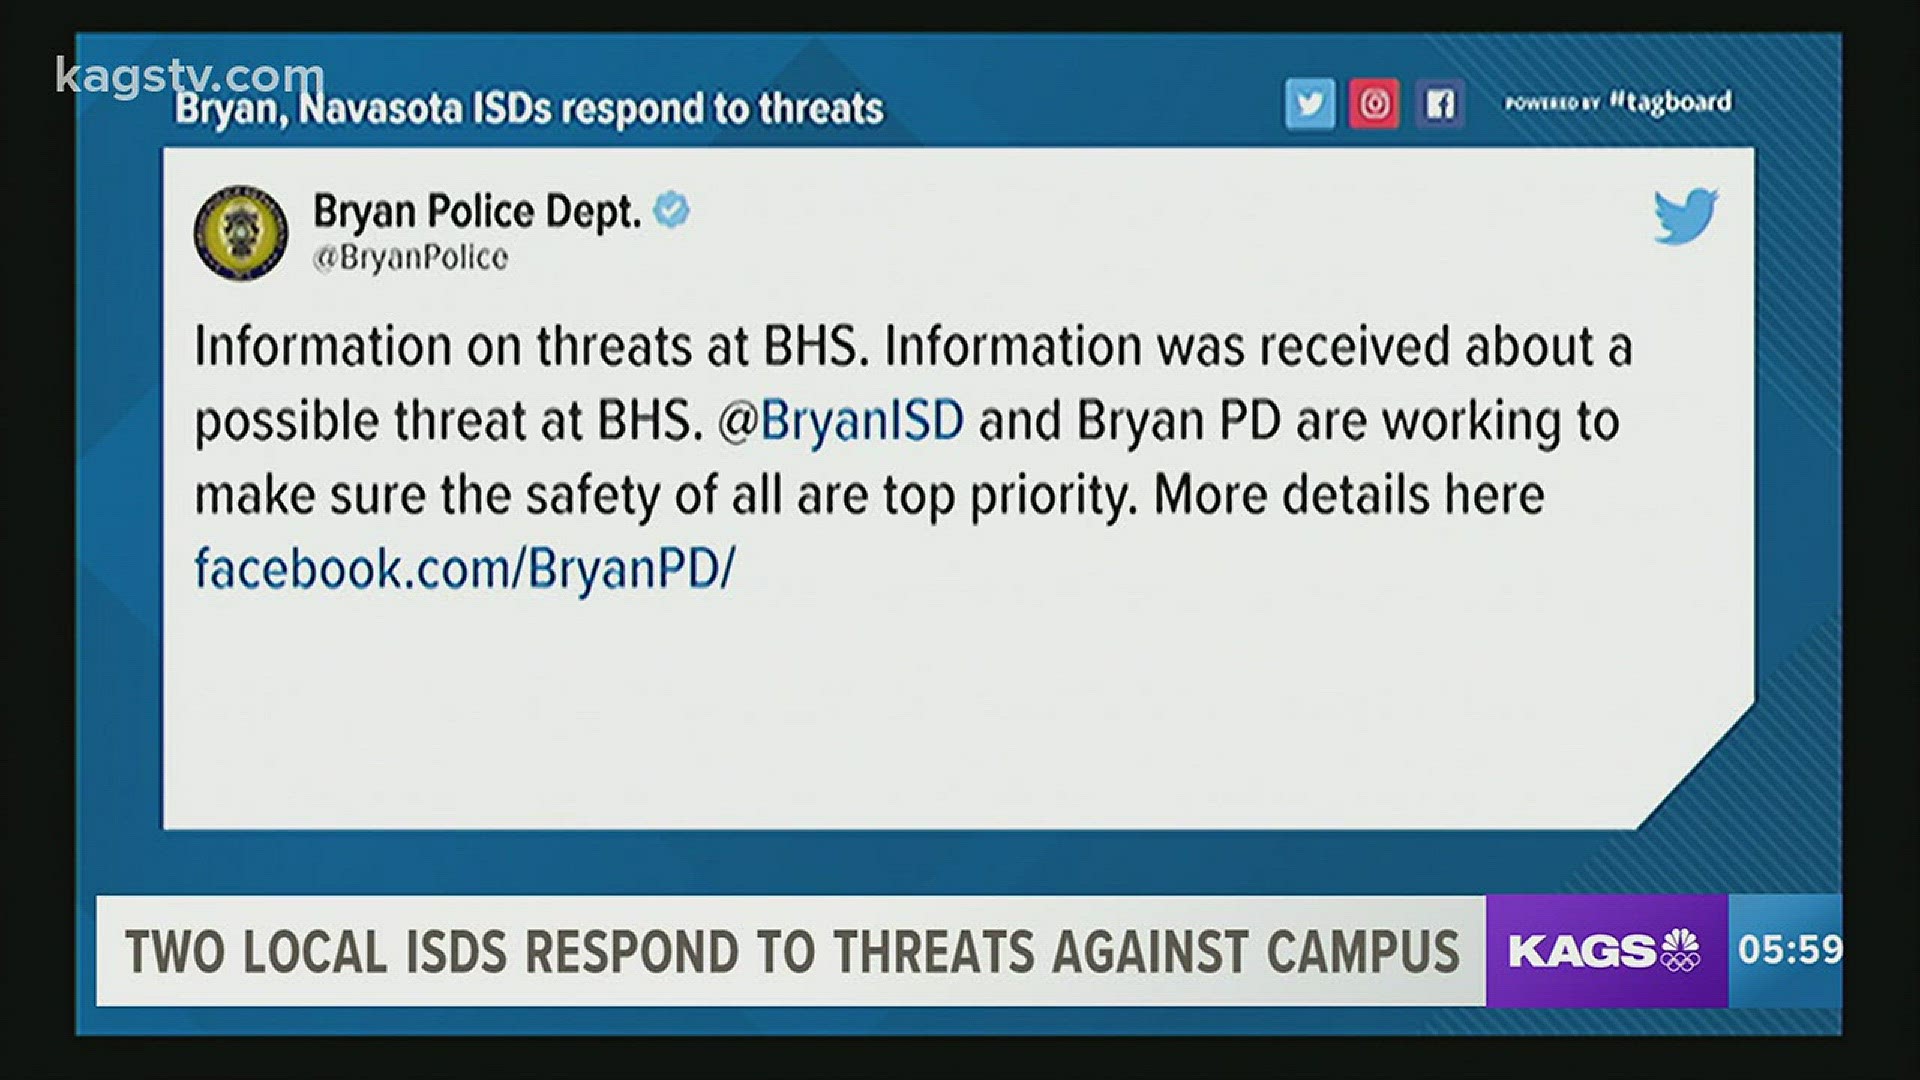 Two of our local school districts responded to low-grade threats on campus. Both Bryan and Navasota ISD responded to threats, which officials have confirmed are now under control.